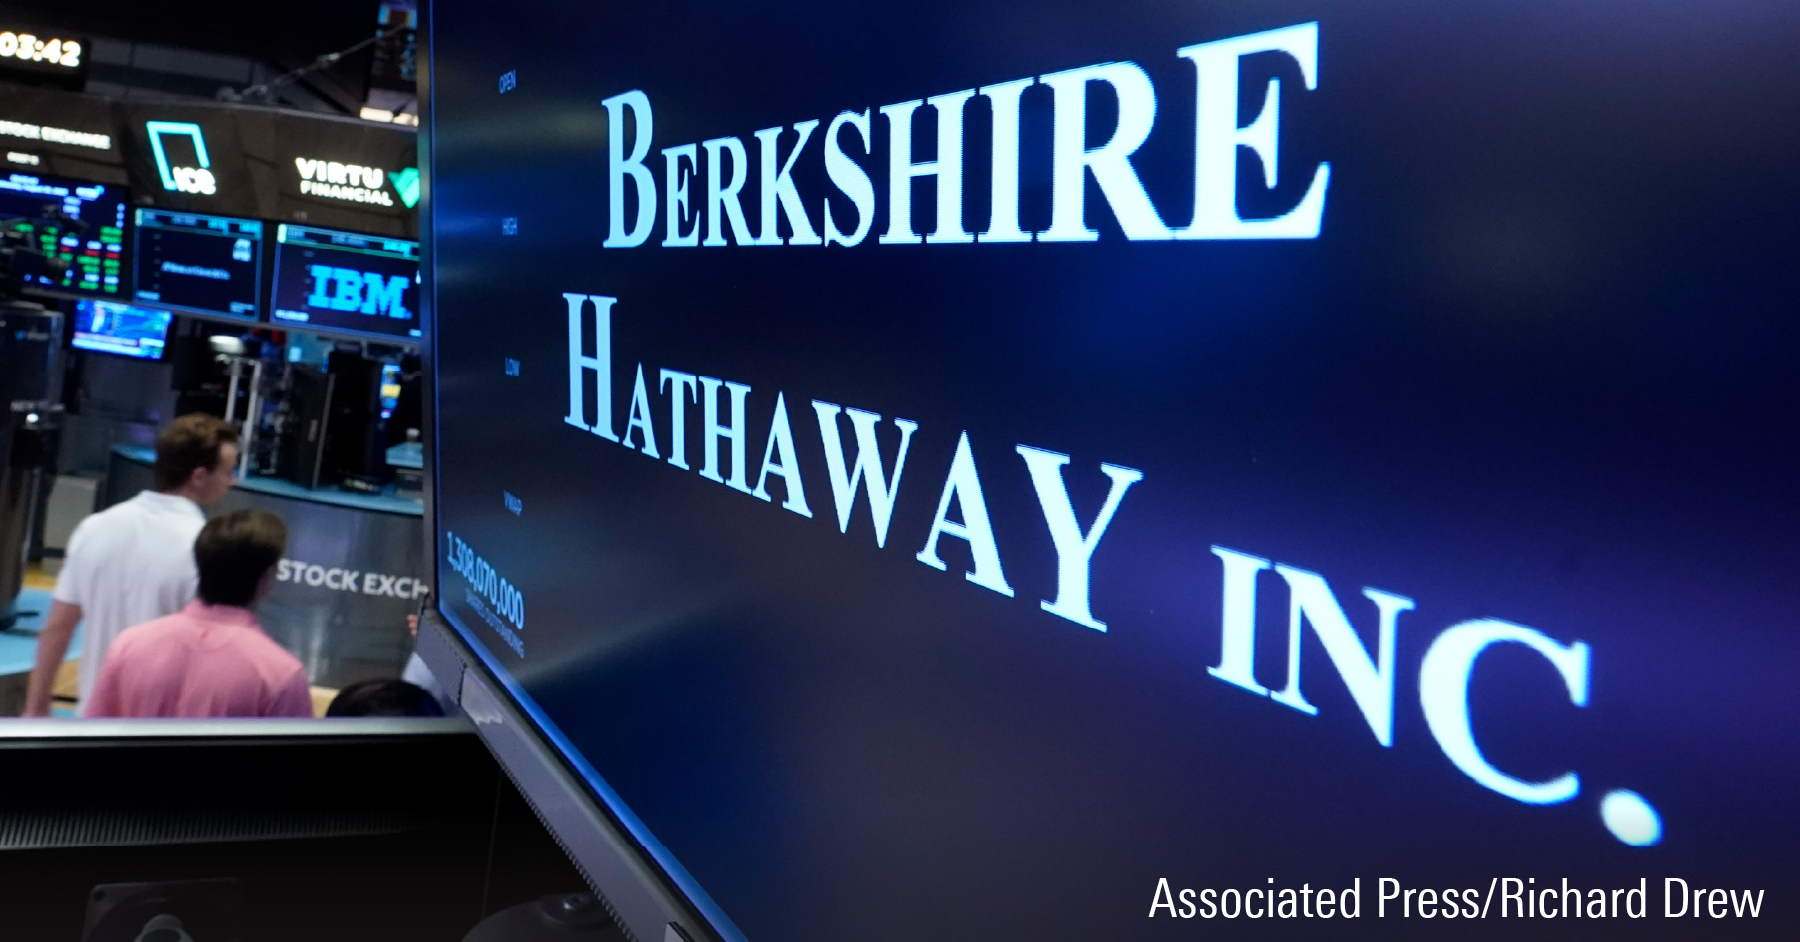 The logo for Berkshire Hathaway Inc. is displayed at a trading post on the floor of the New York Stock Exchange, Aug. 30, 2023.